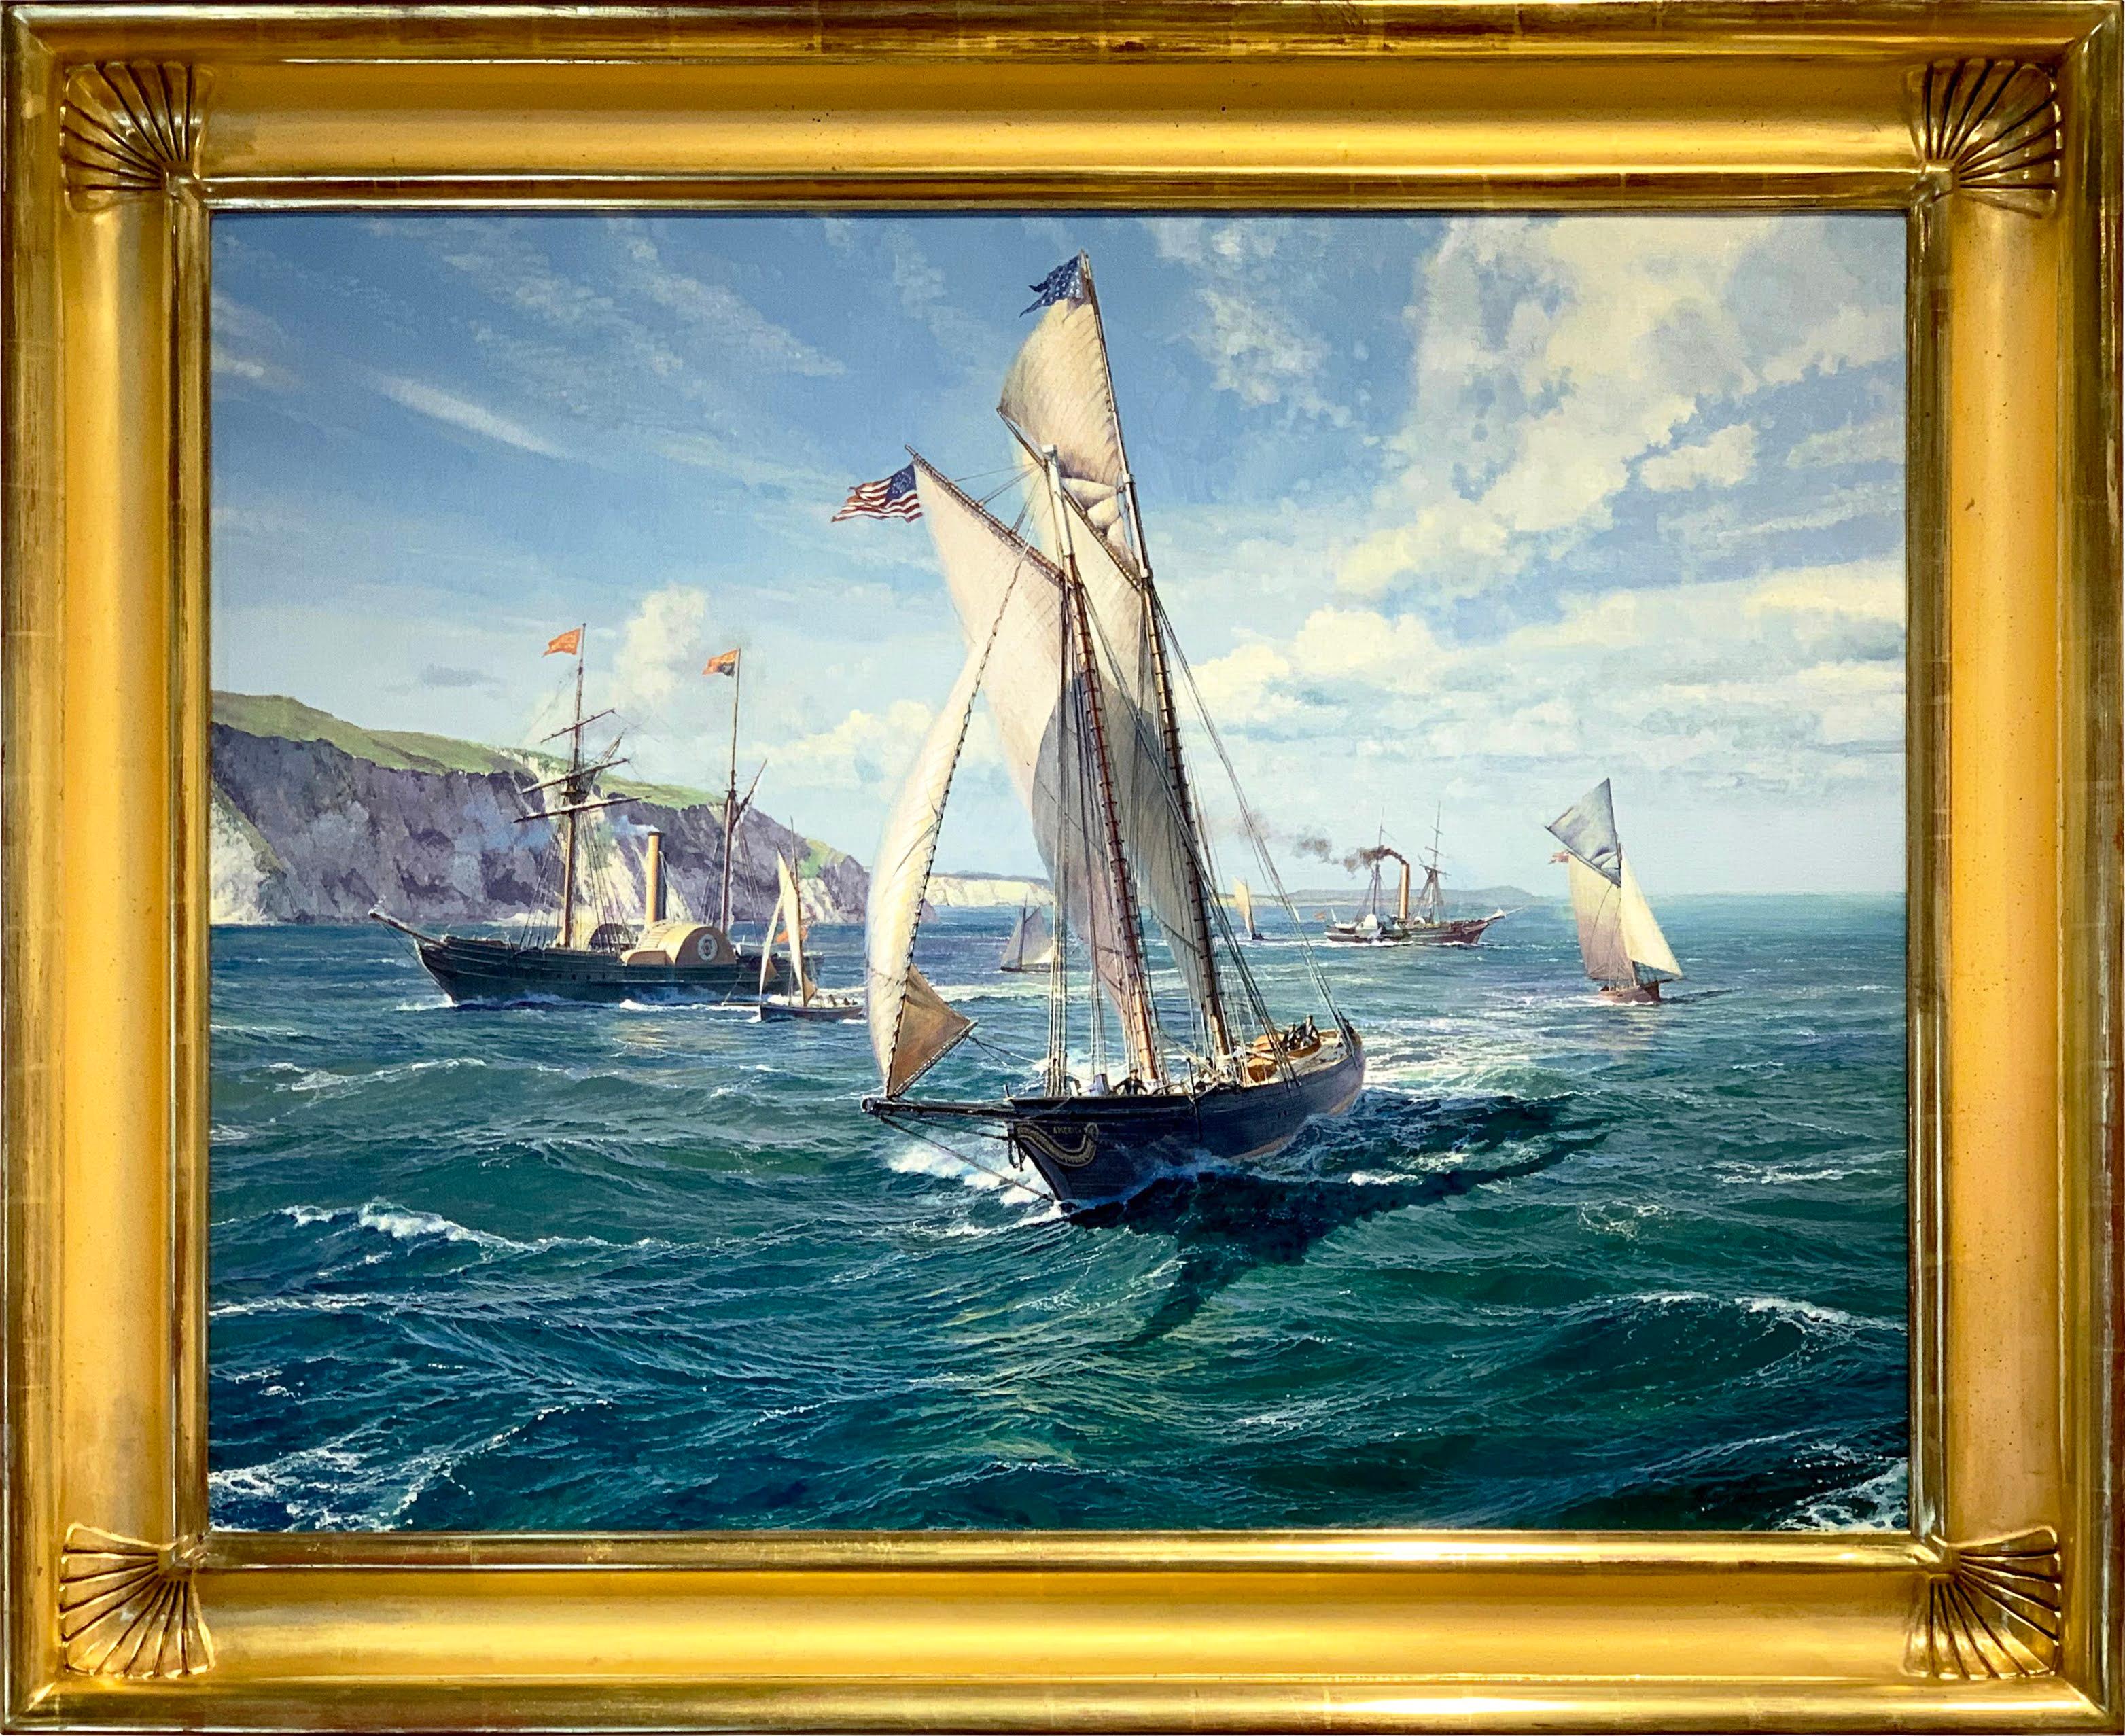 The Yacht America at Freshwater Bay - Painting by Maarten Platje